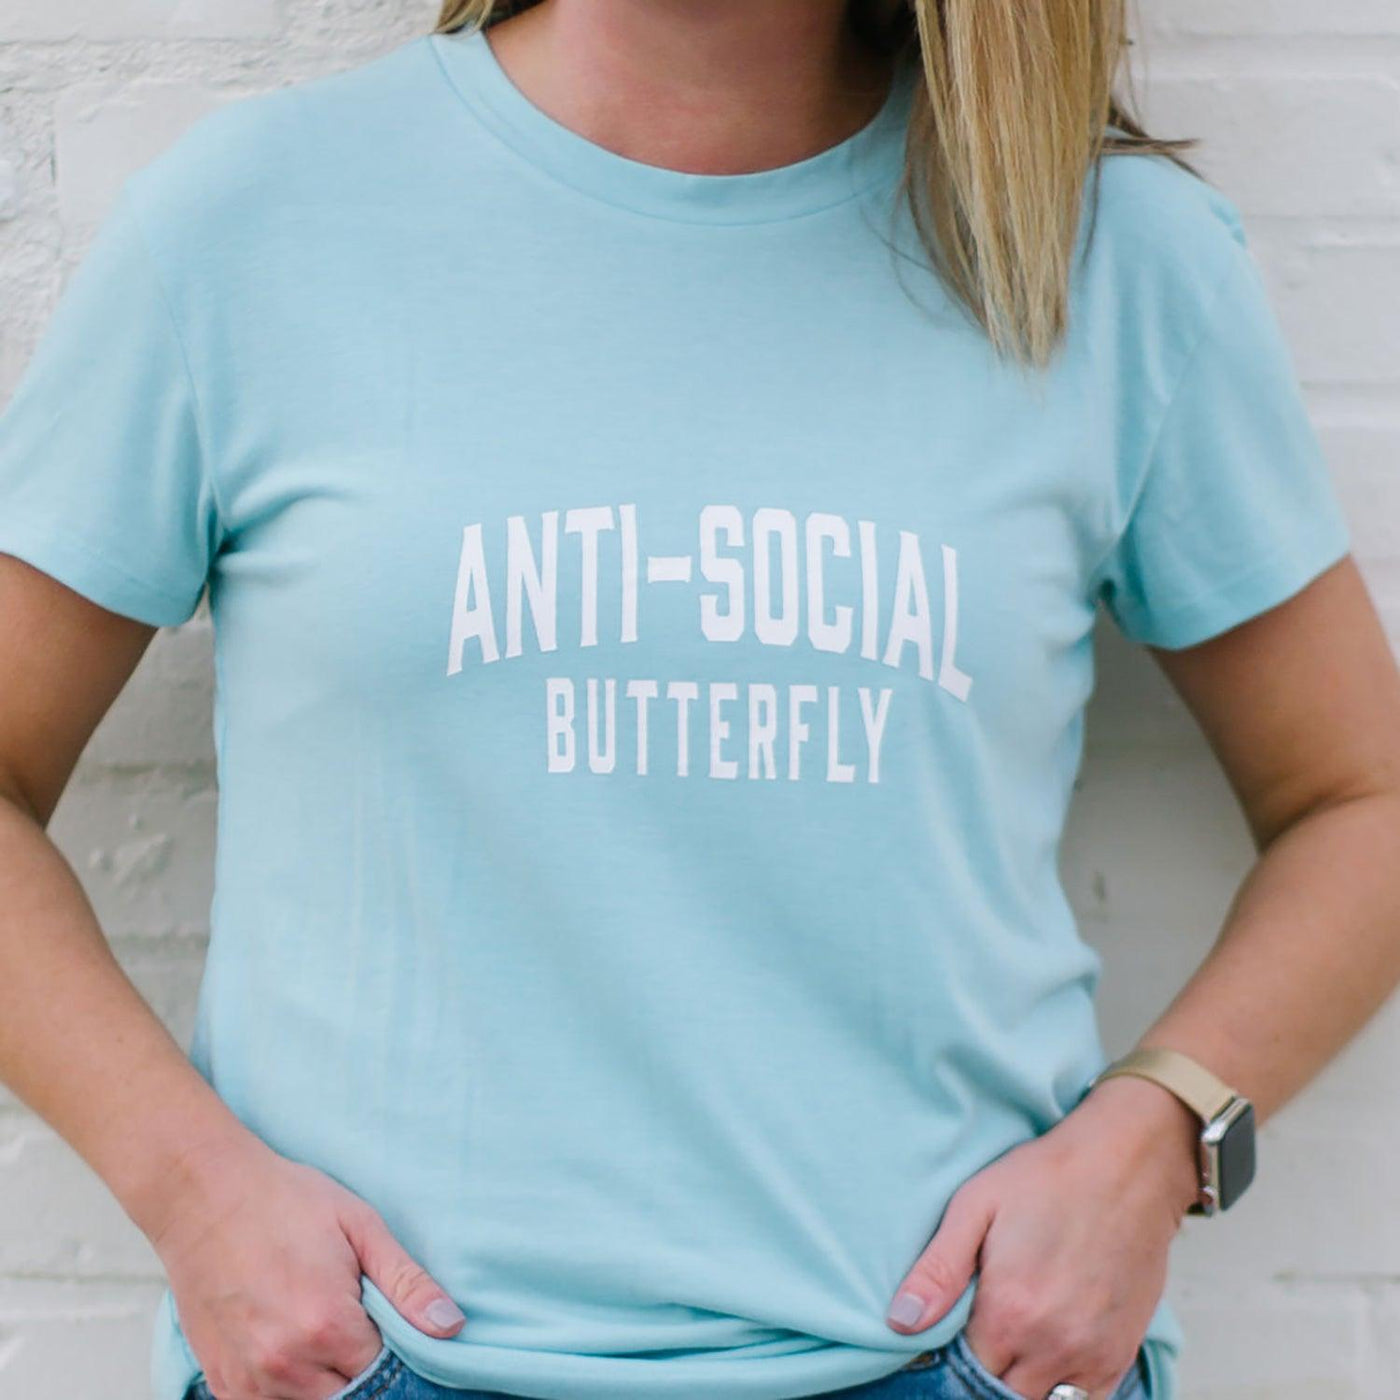 Anti-Social Butterfly | Tee - Mary Square, LLC